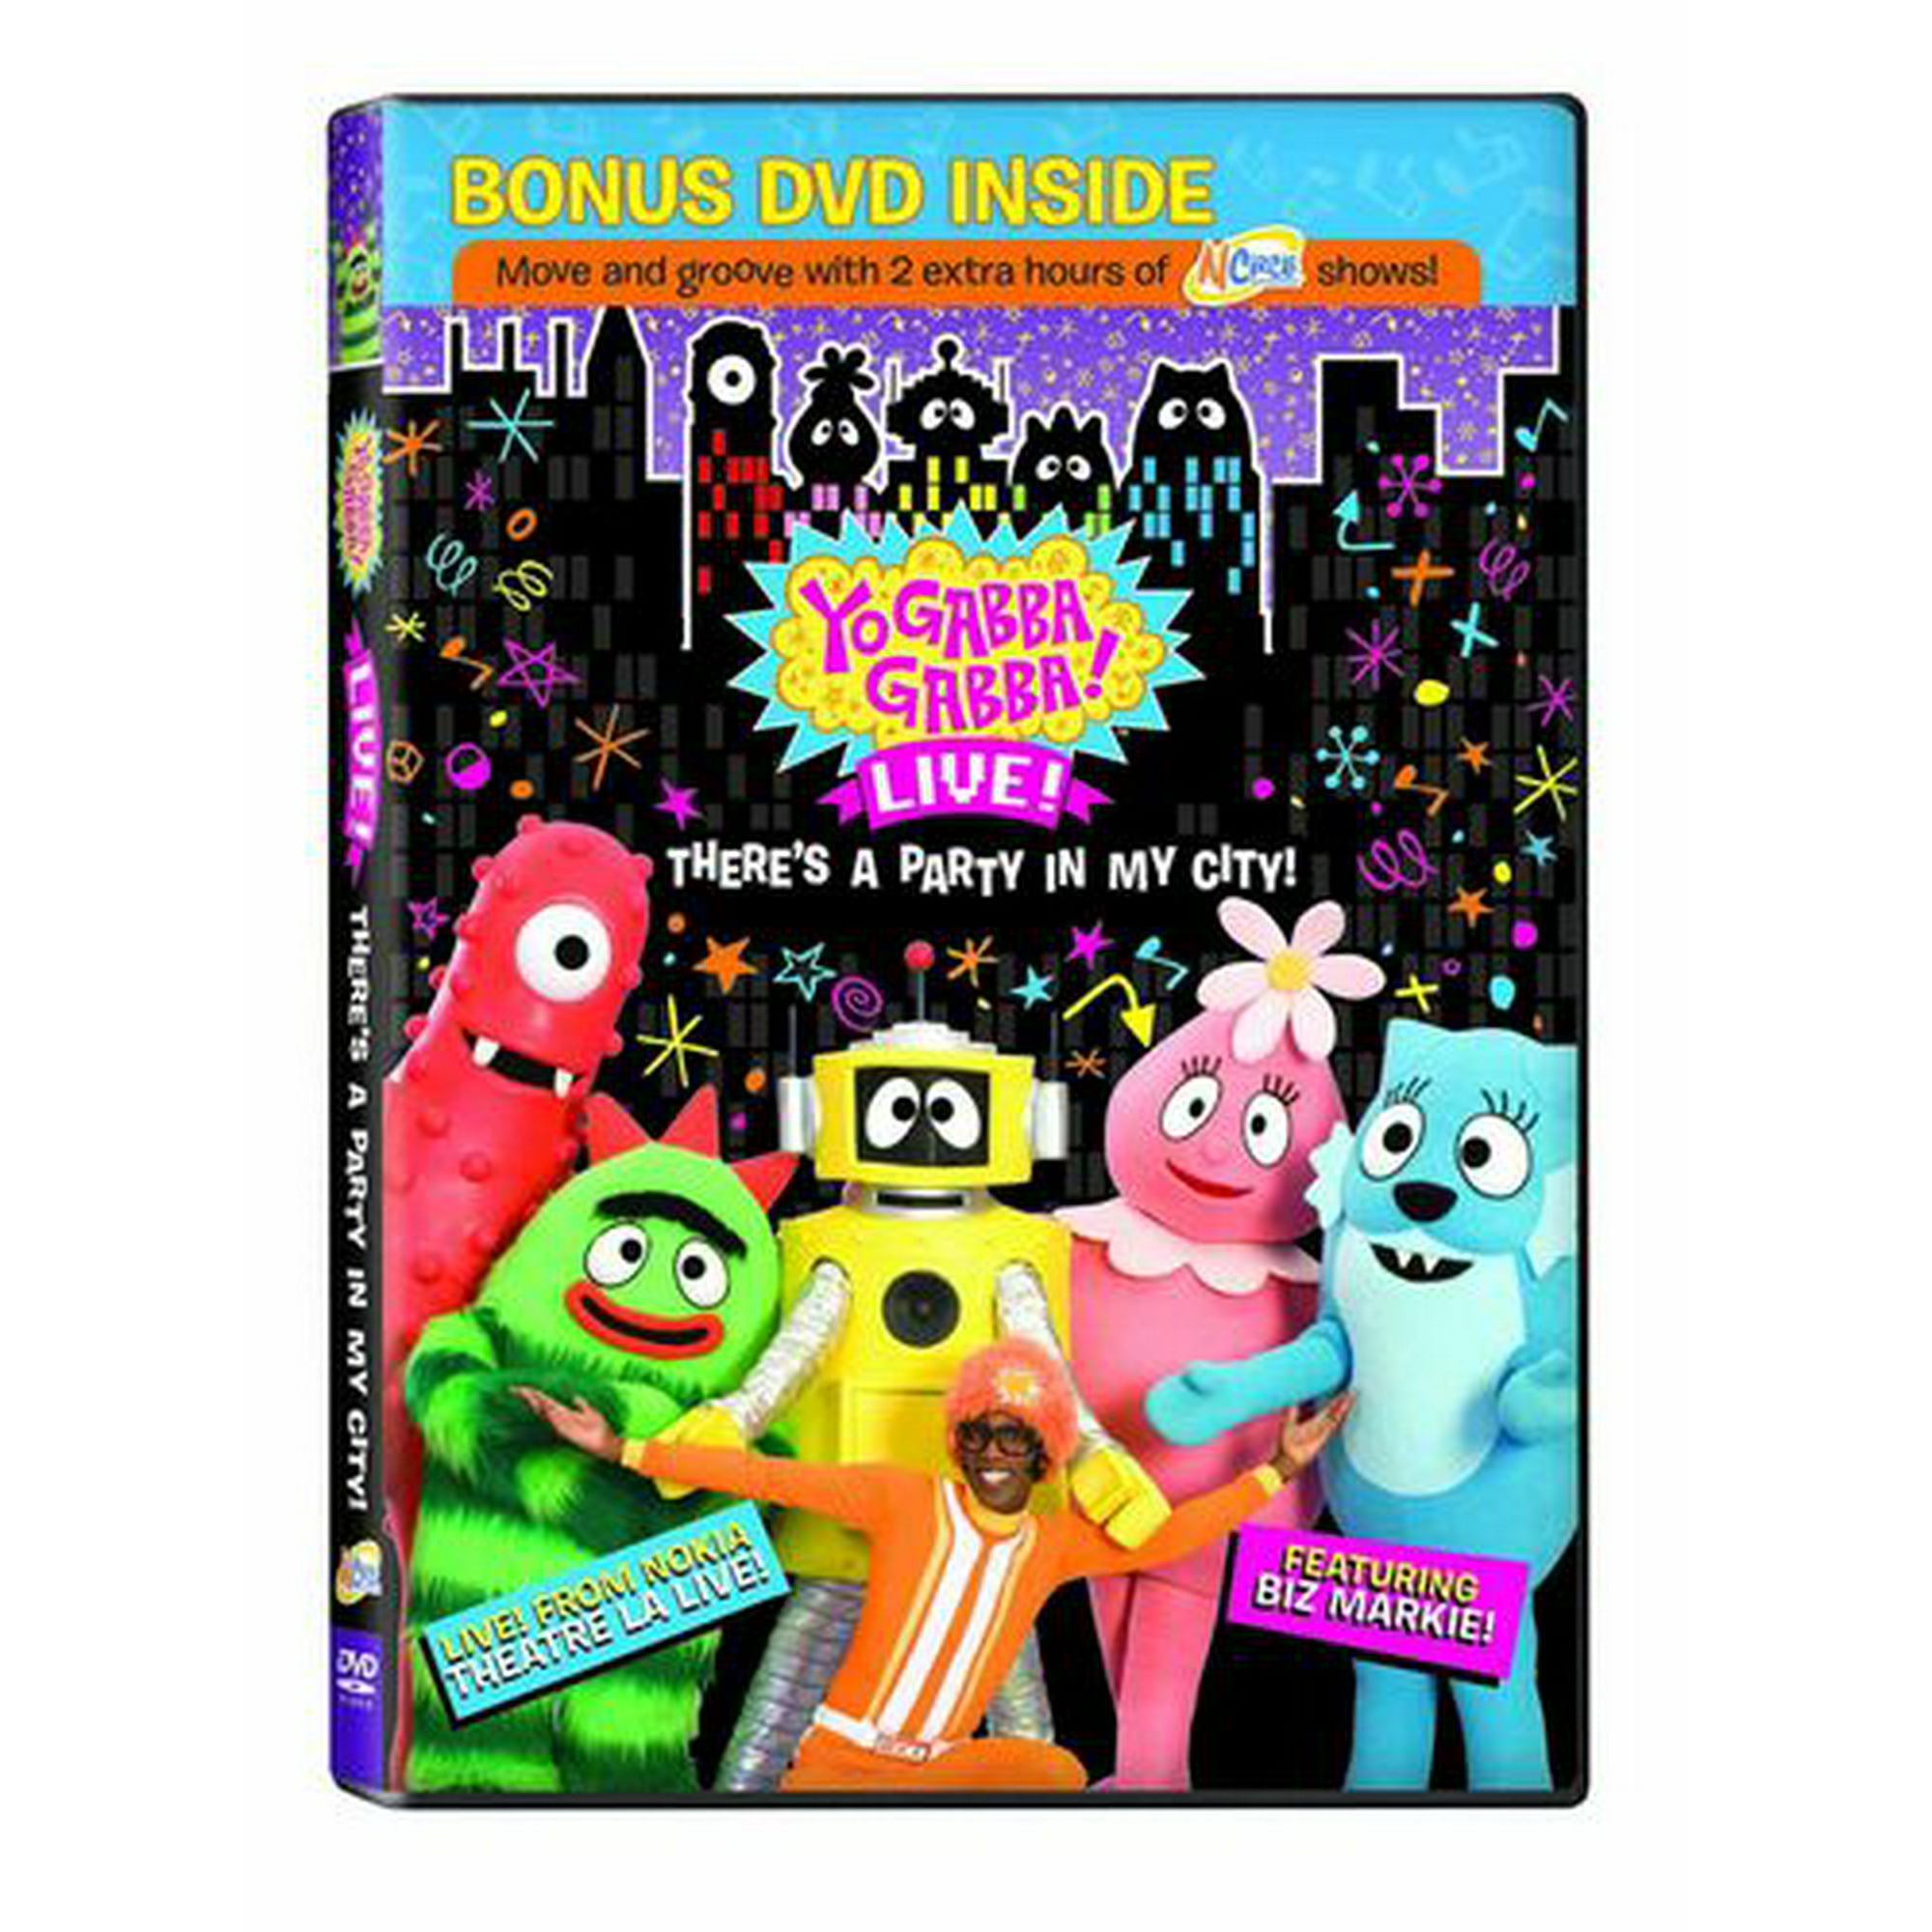 How to watch and stream Yo Gabba Gabba Live! There's a Party in My